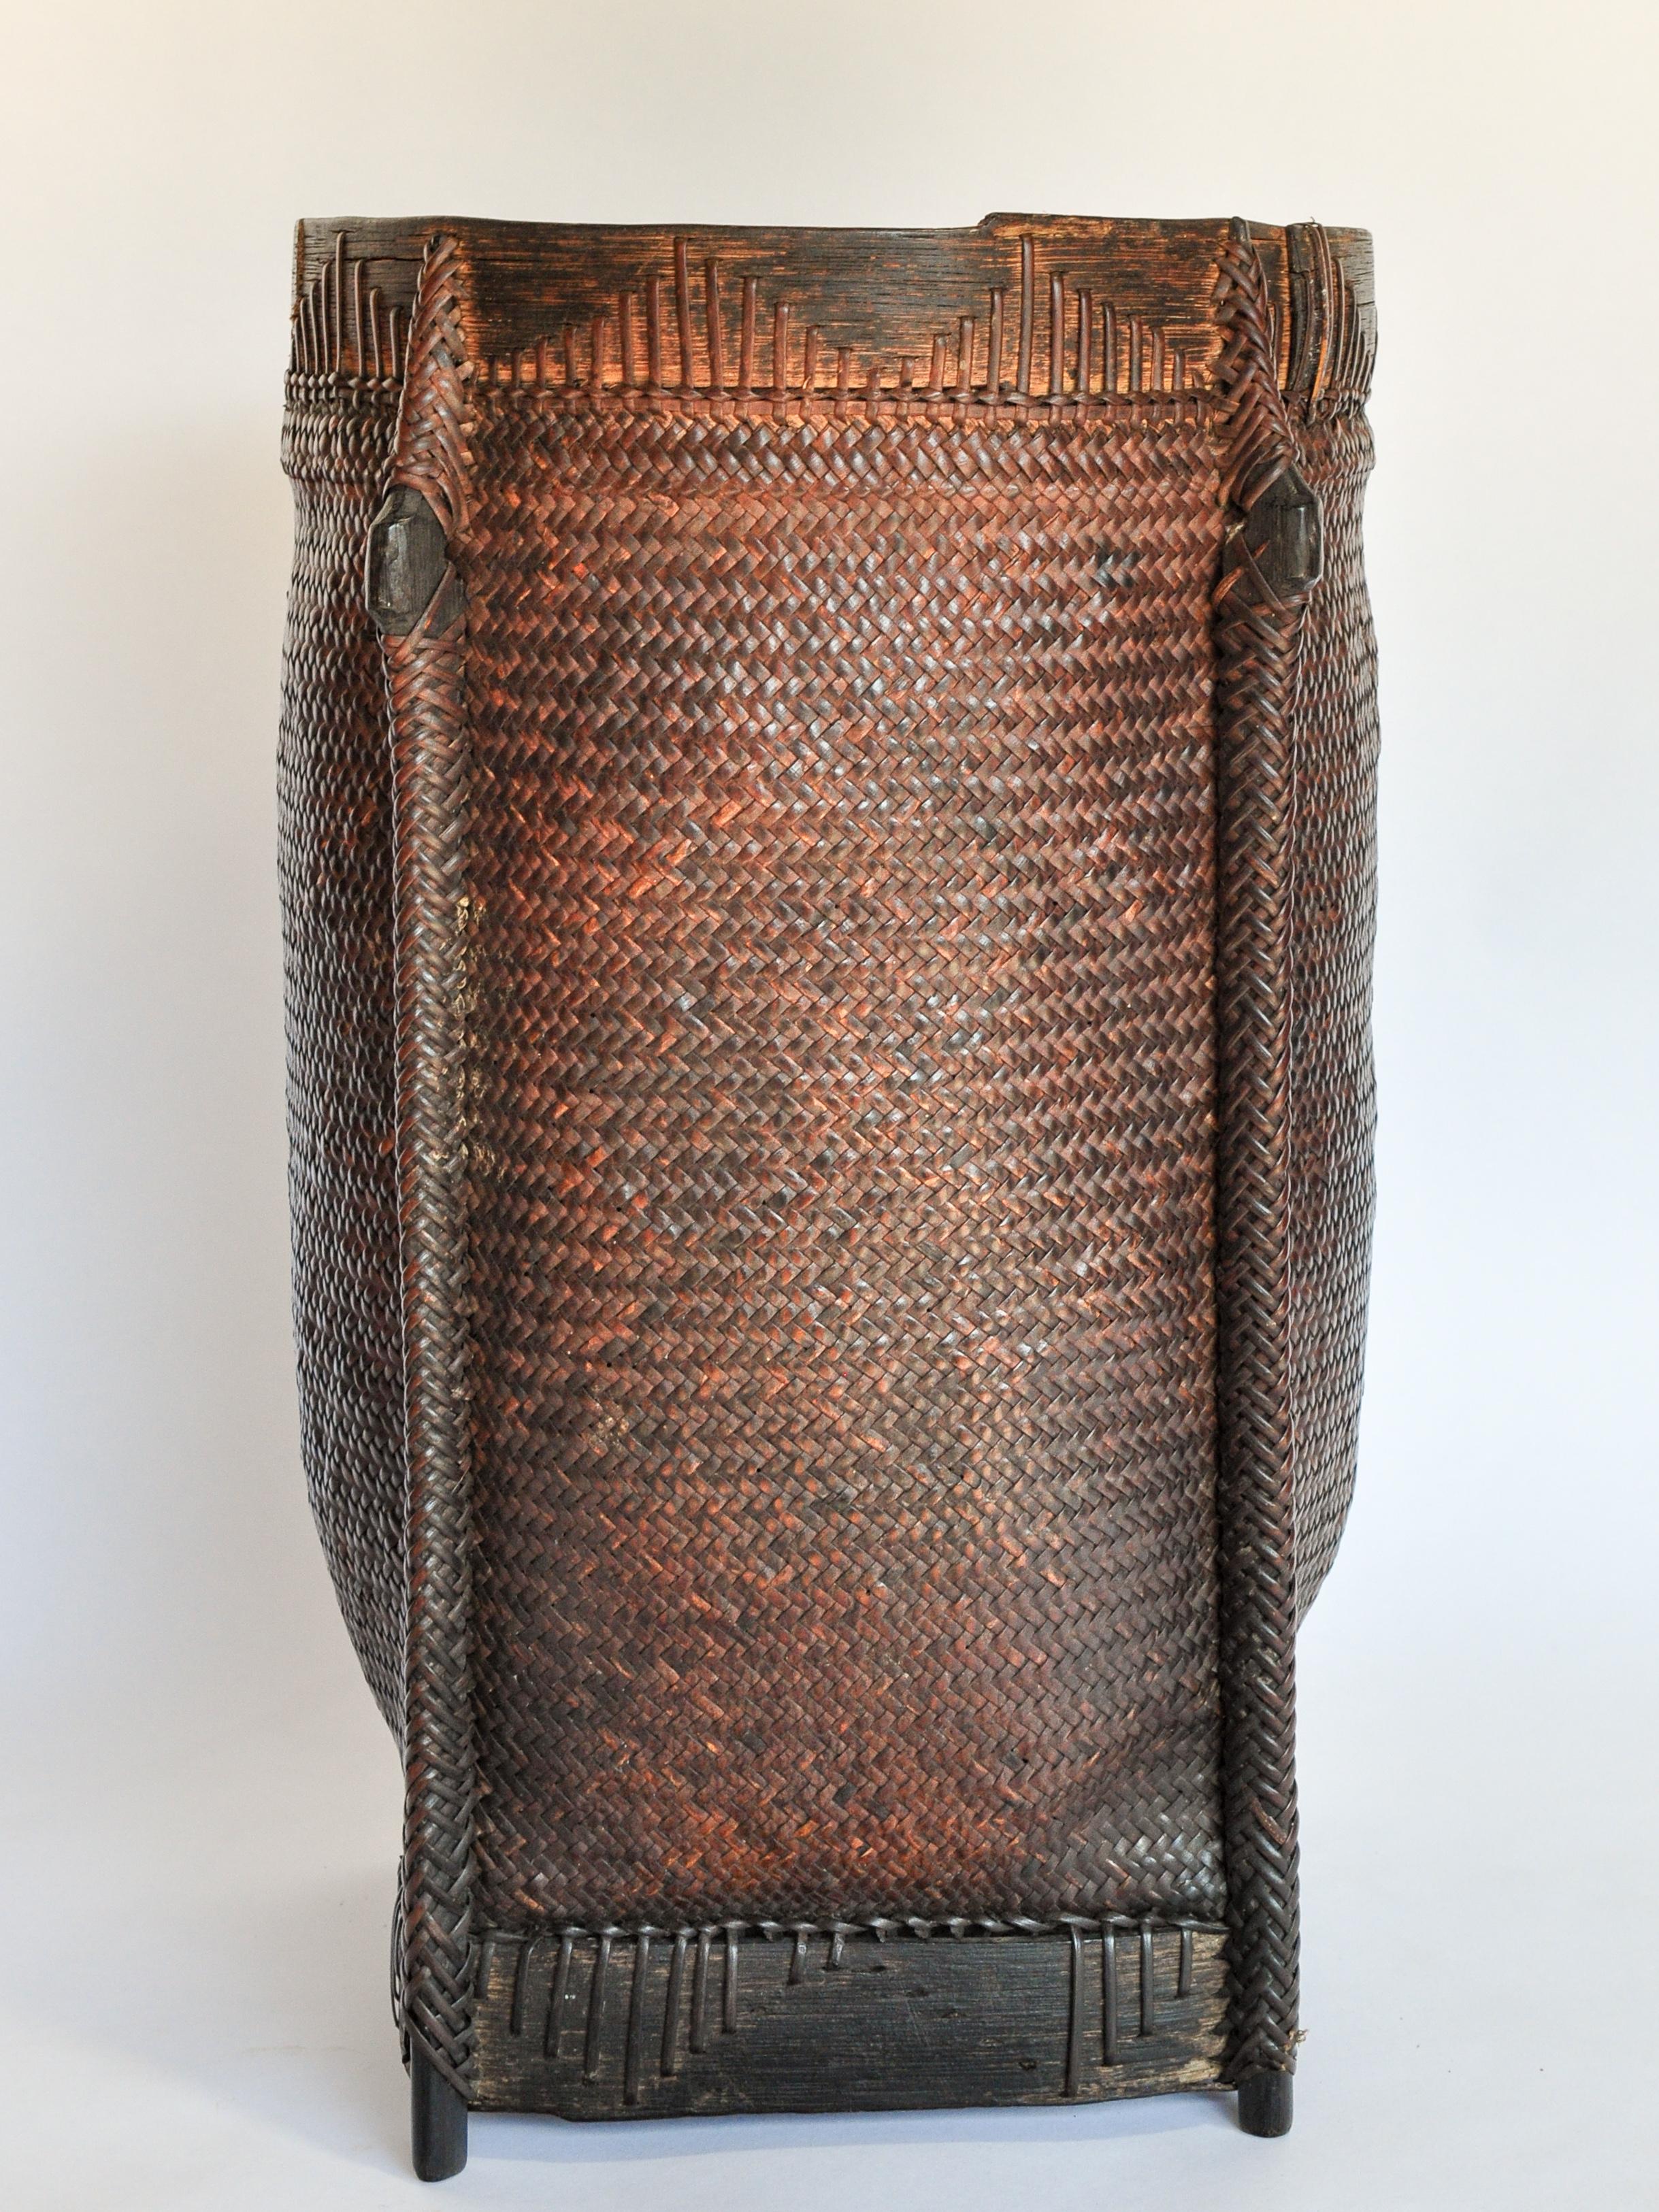 Tribal Carrying and Storage Basket from Borneo, Mid-20th Century 1